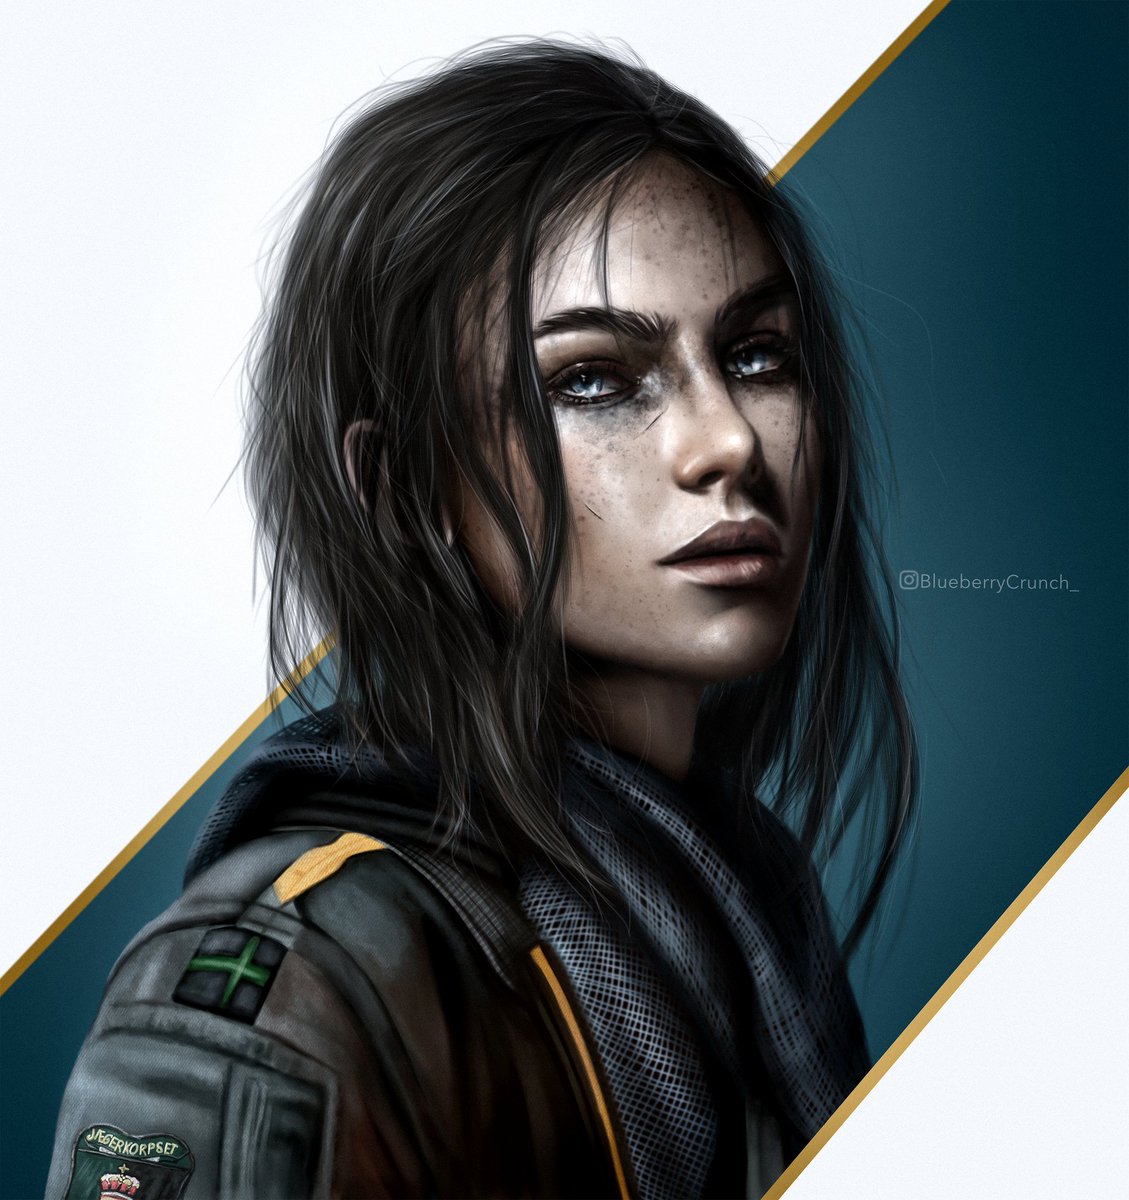 a face for my drawing without having a concrete reference :) #RainbowSixSie...